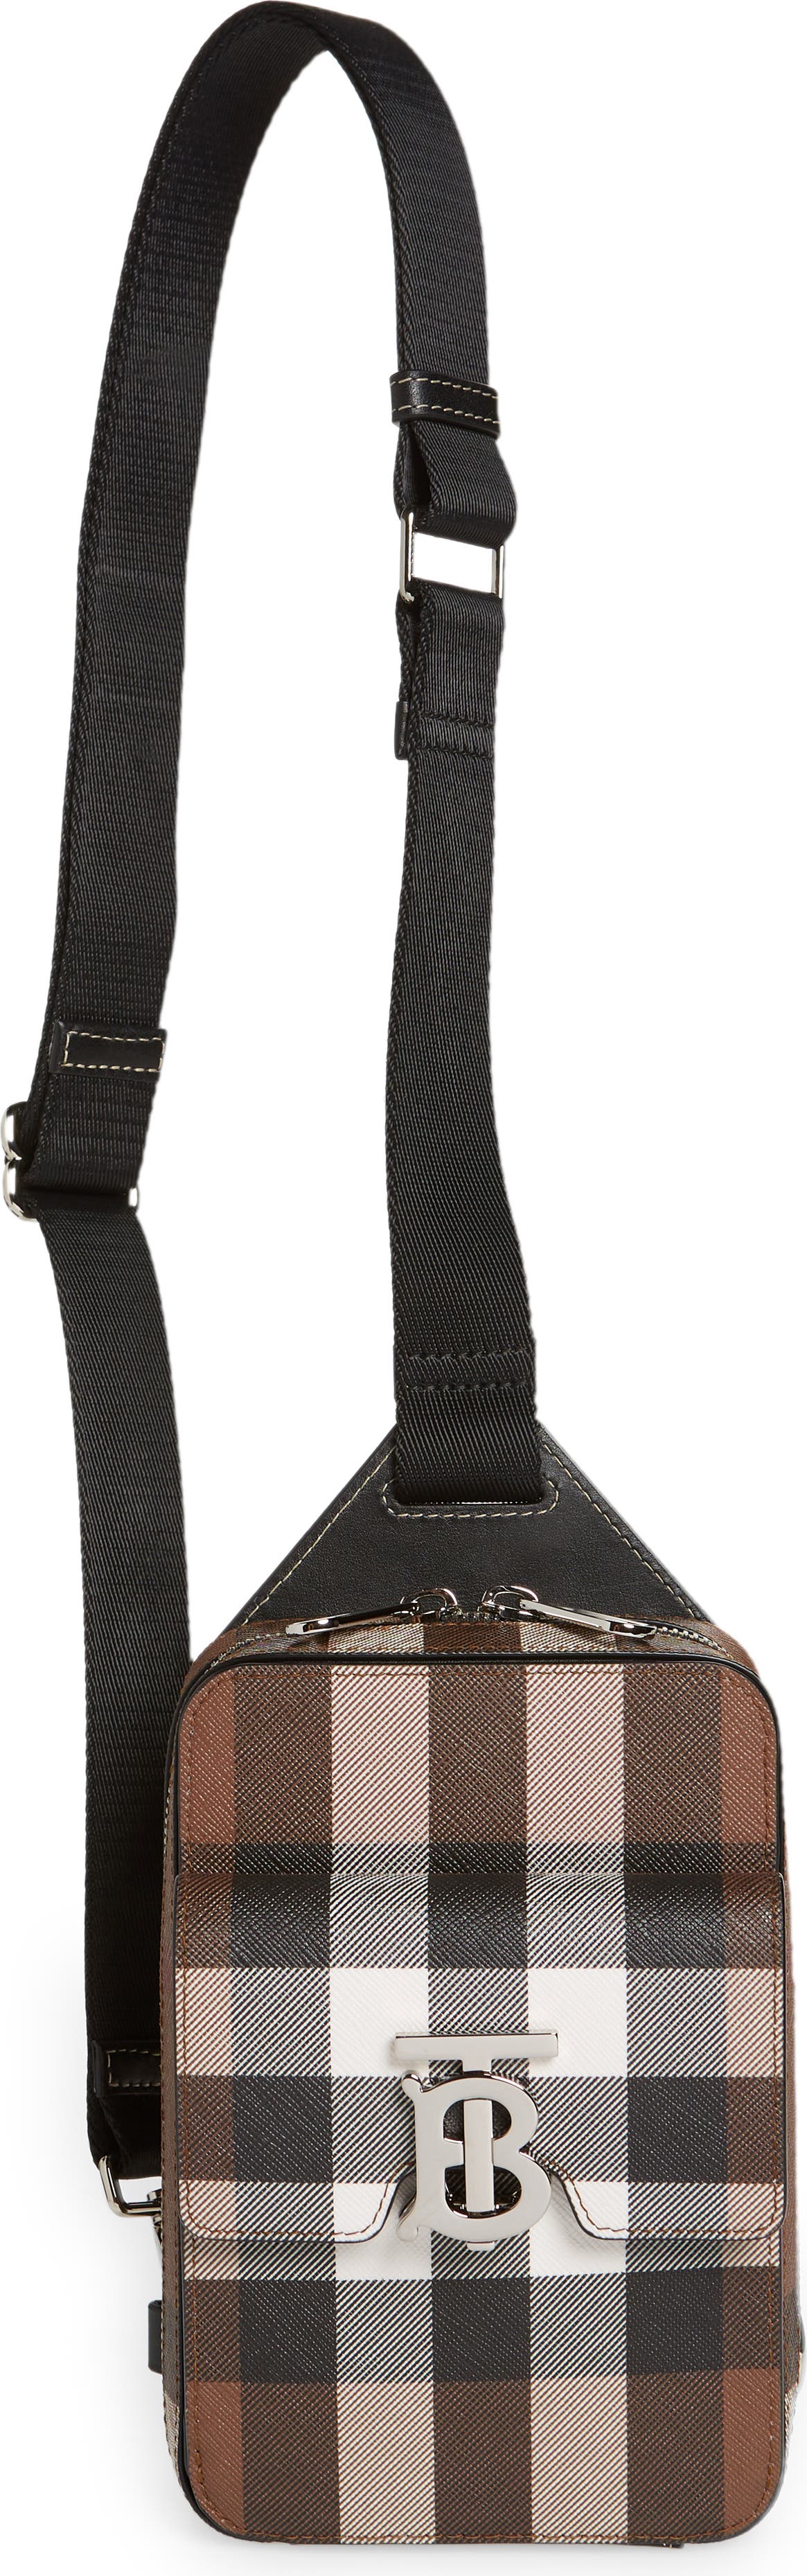 Large Brown Argyle Bucket Bag w/Genuine Leather Trim Front & Back Personalized 